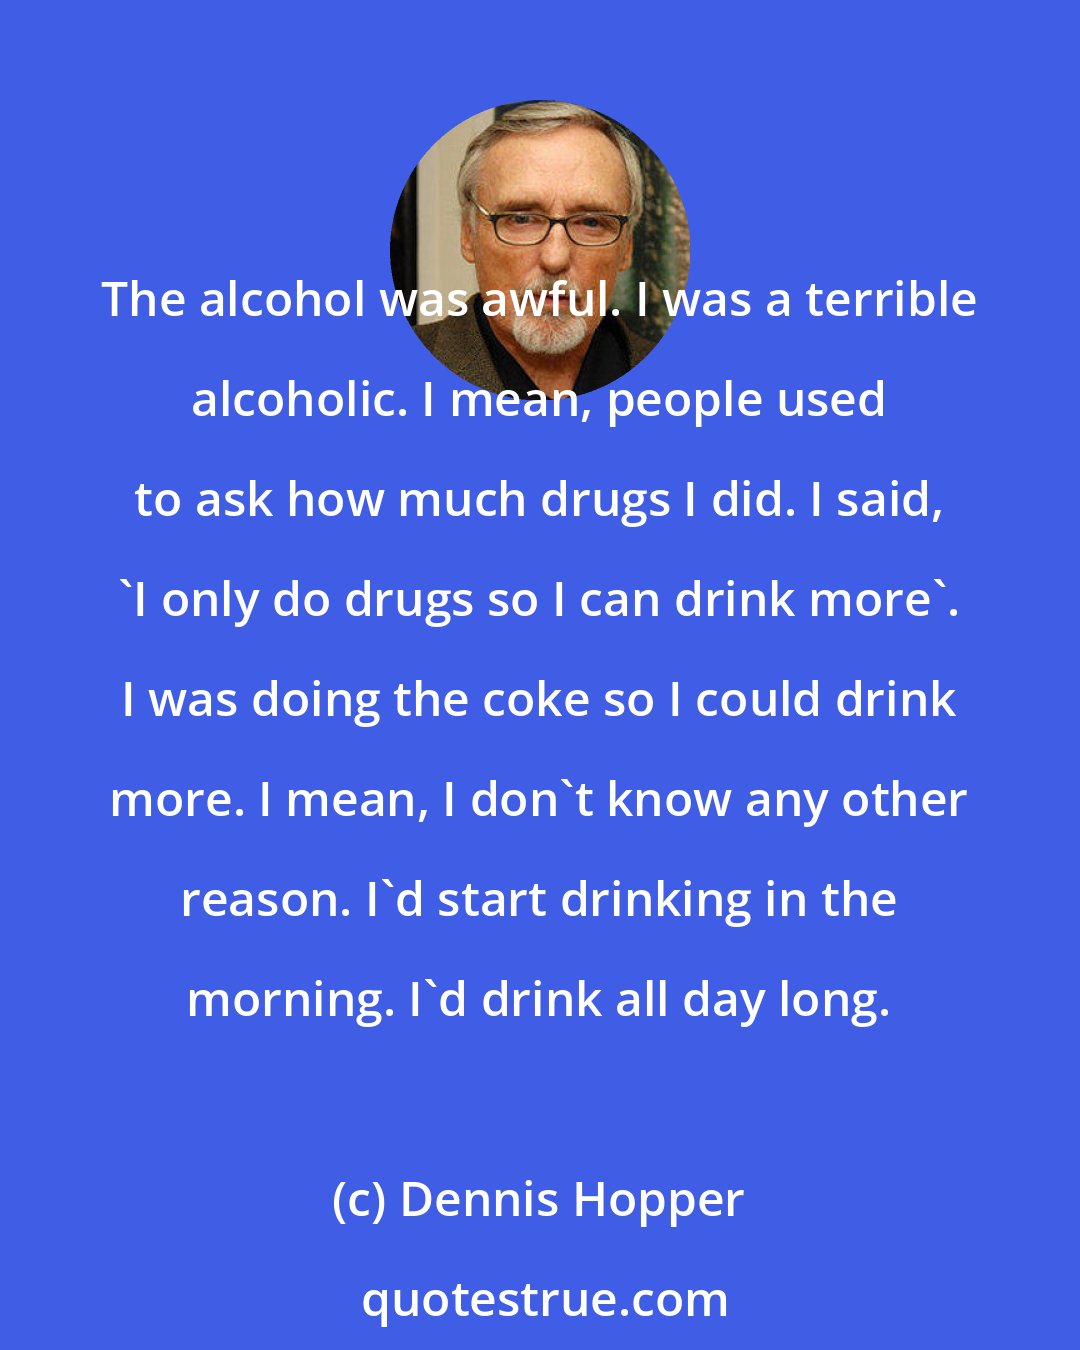 Dennis Hopper: The alcohol was awful. I was a terrible alcoholic. I mean, people used to ask how much drugs I did. I said, 'I only do drugs so I can drink more'. I was doing the coke so I could drink more. I mean, I don't know any other reason. I'd start drinking in the morning. I'd drink all day long.